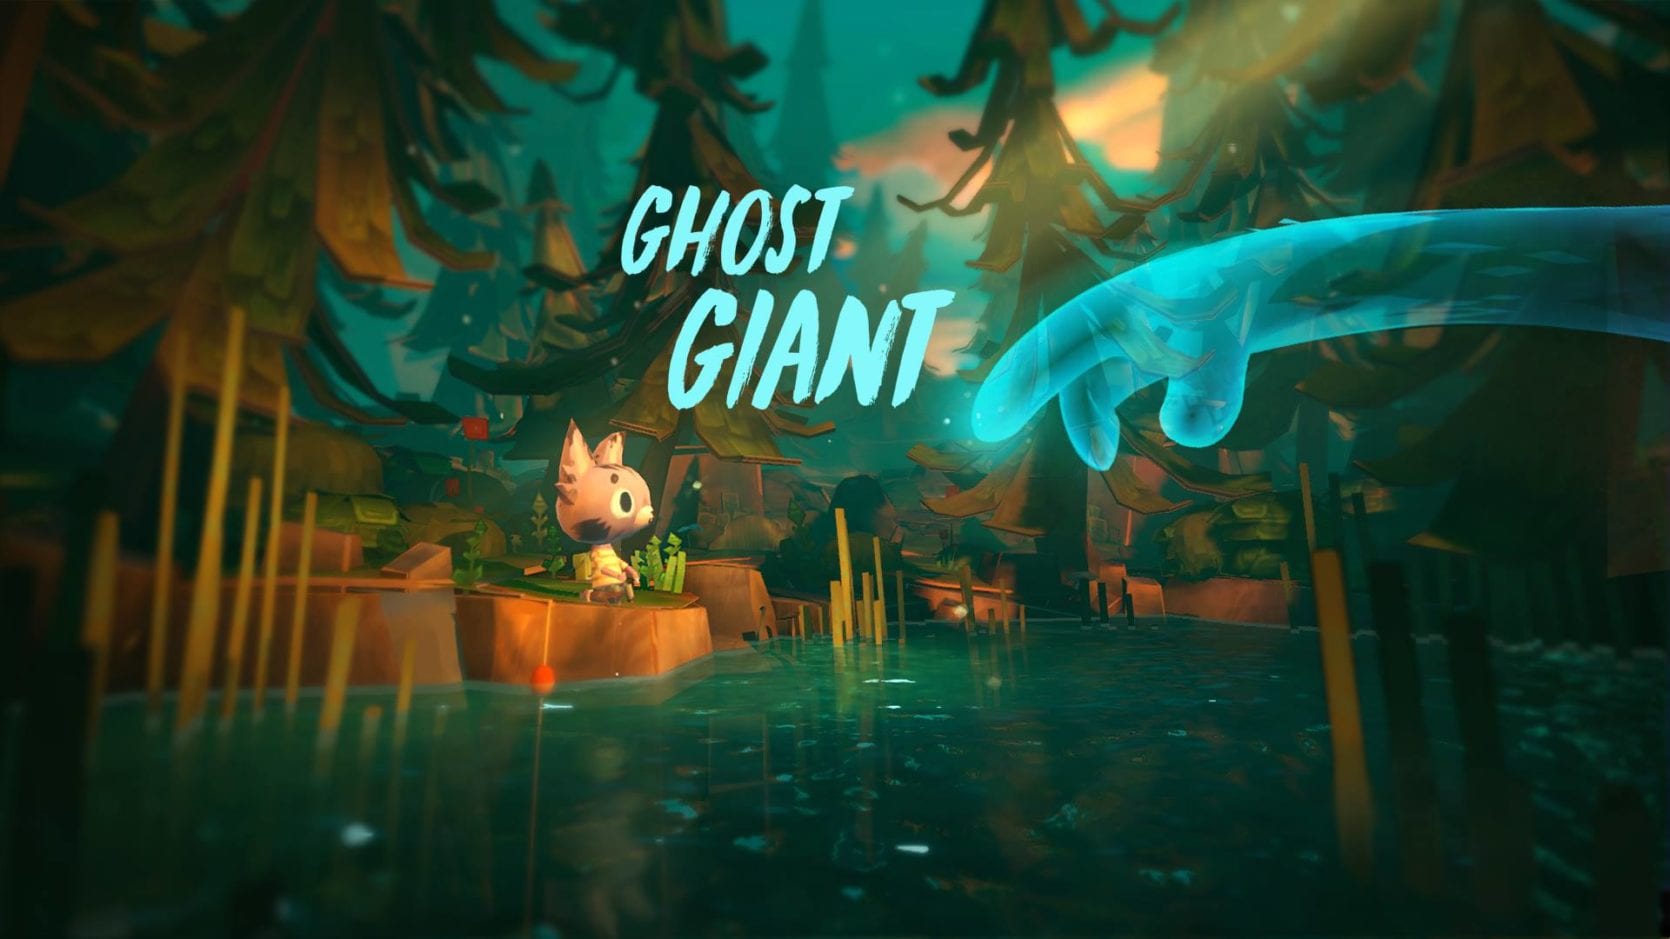 vr ghost giant download free